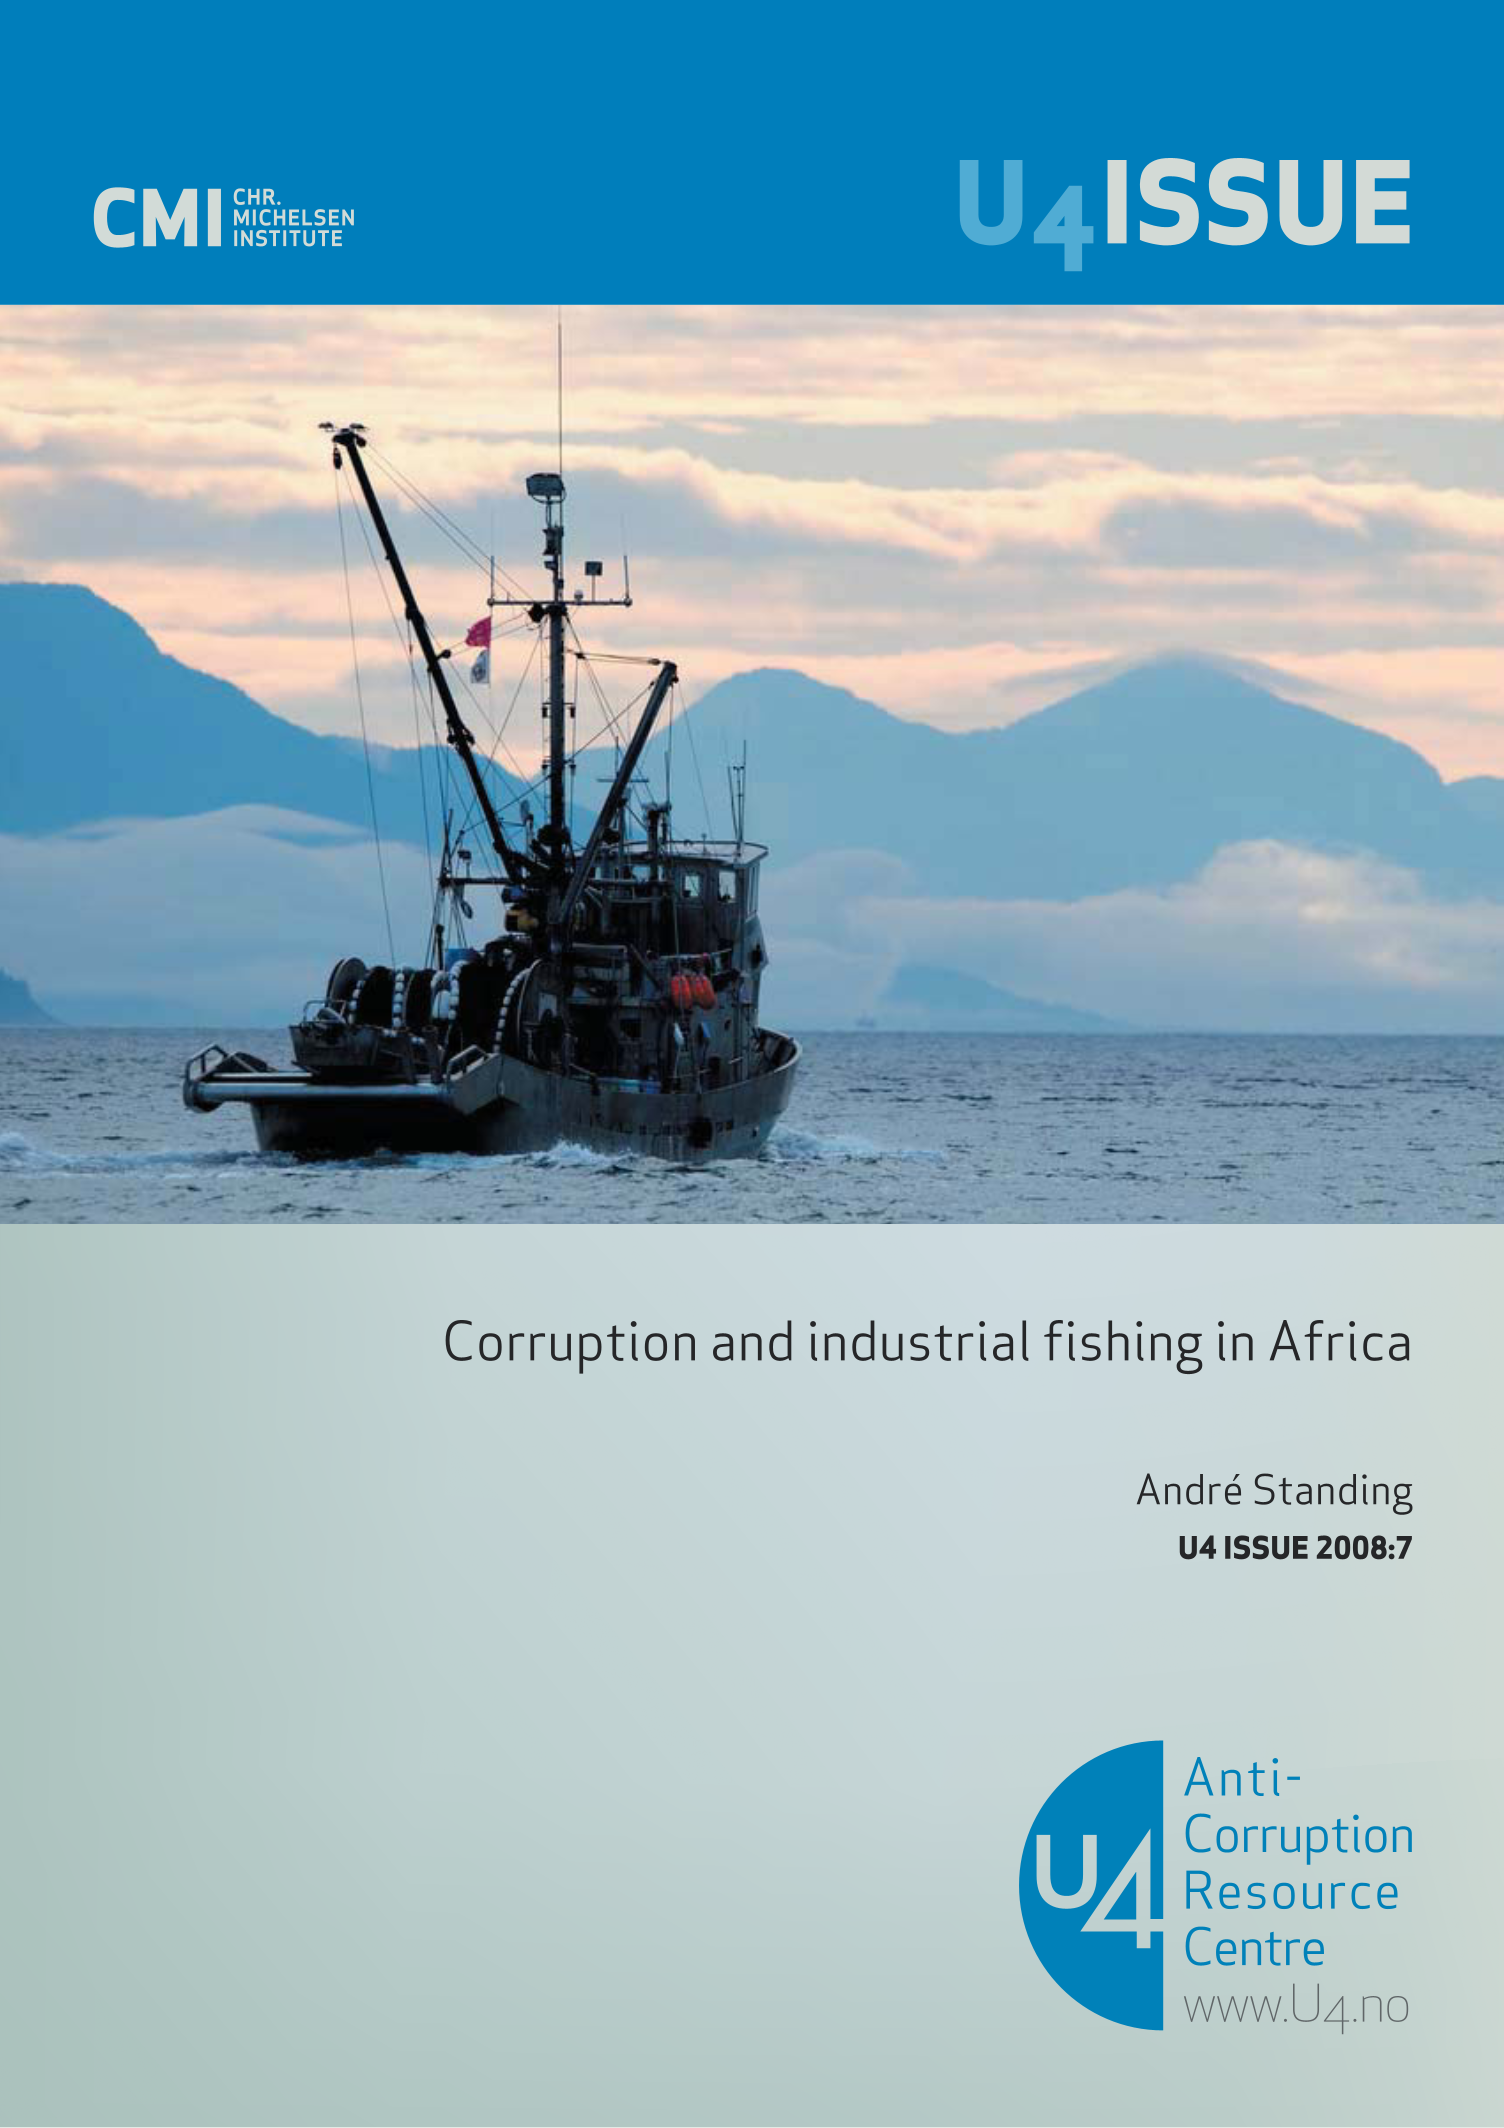 Corruption and industrial fishing in Africa